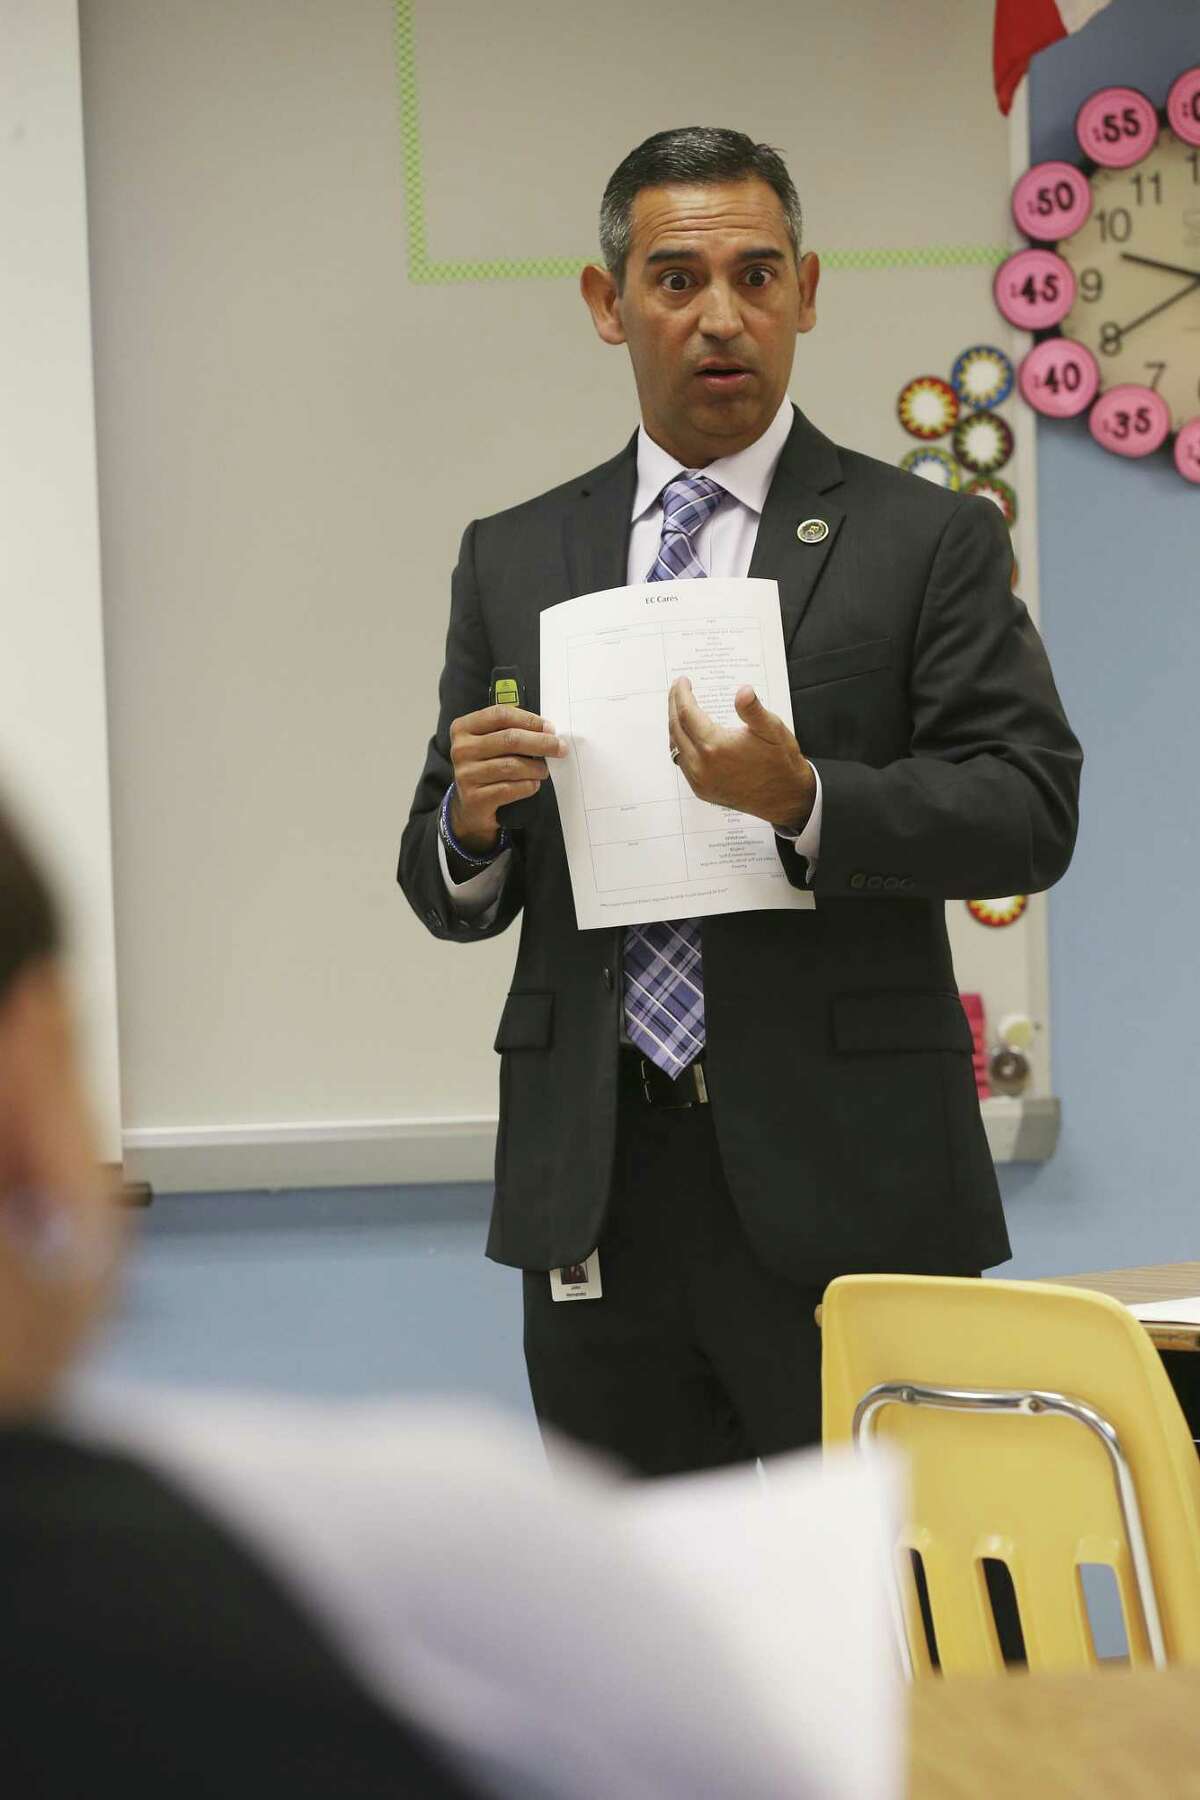 East Central Independent School District Director of Student Service John Hernandez conducts an EC Cares presentation for staff at Oak Crest Elementary School, Thursday, August 23, 2018. Hernandez developed the "trauma-sensitive school" system for his district, training bus drivers, cafeteria workers and custodians -- not just teachers and counselors -- how to recognize early signs of trouble, big and small, in students so counselors can respond immediately.